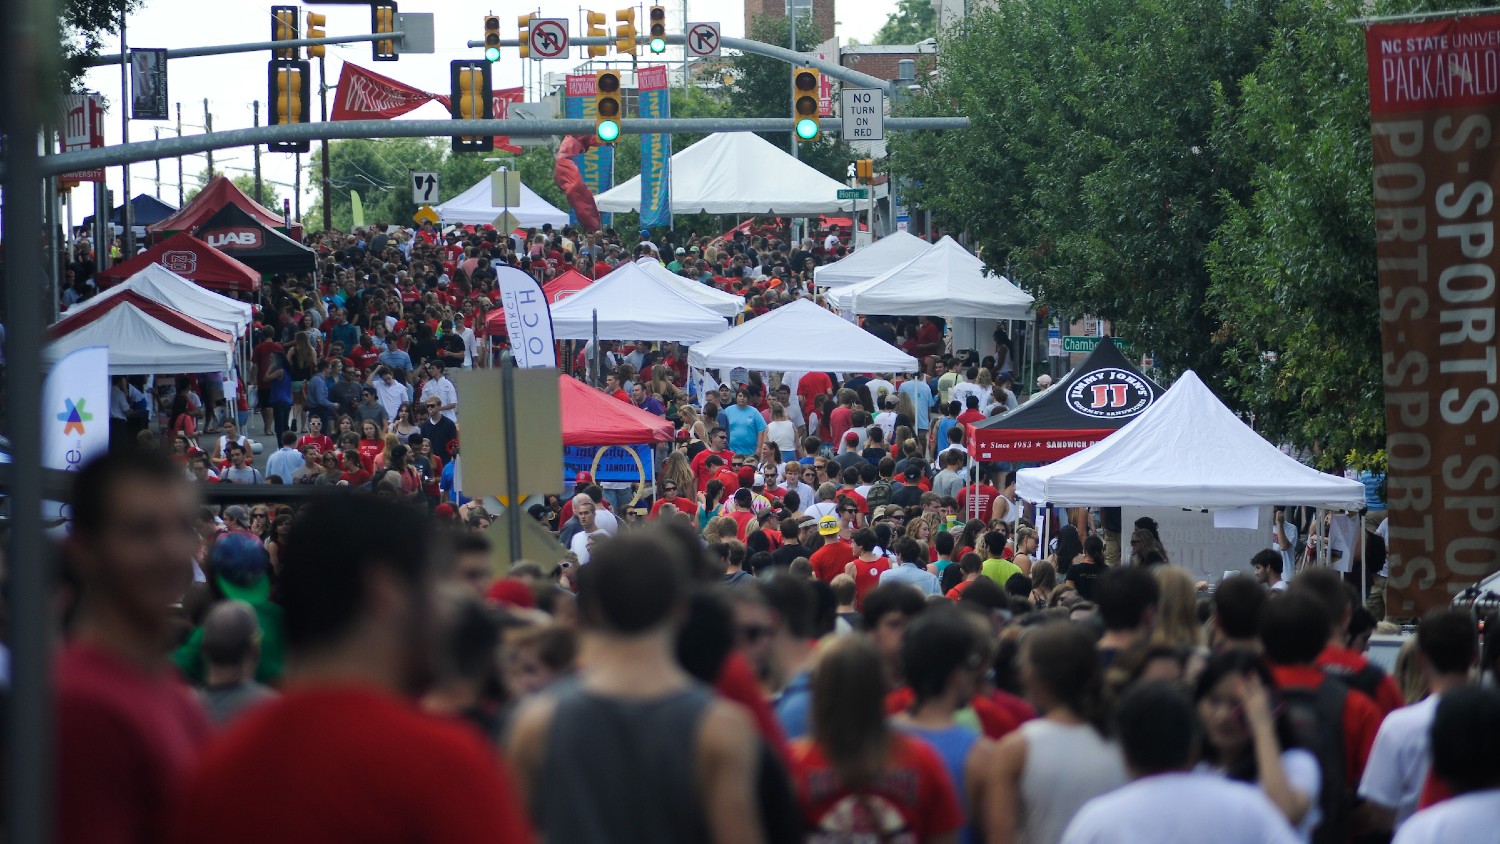 NC State will celebrate the 10th anniversary of Packapalooza, the university's all-day block party and street festival, Aug. 27.